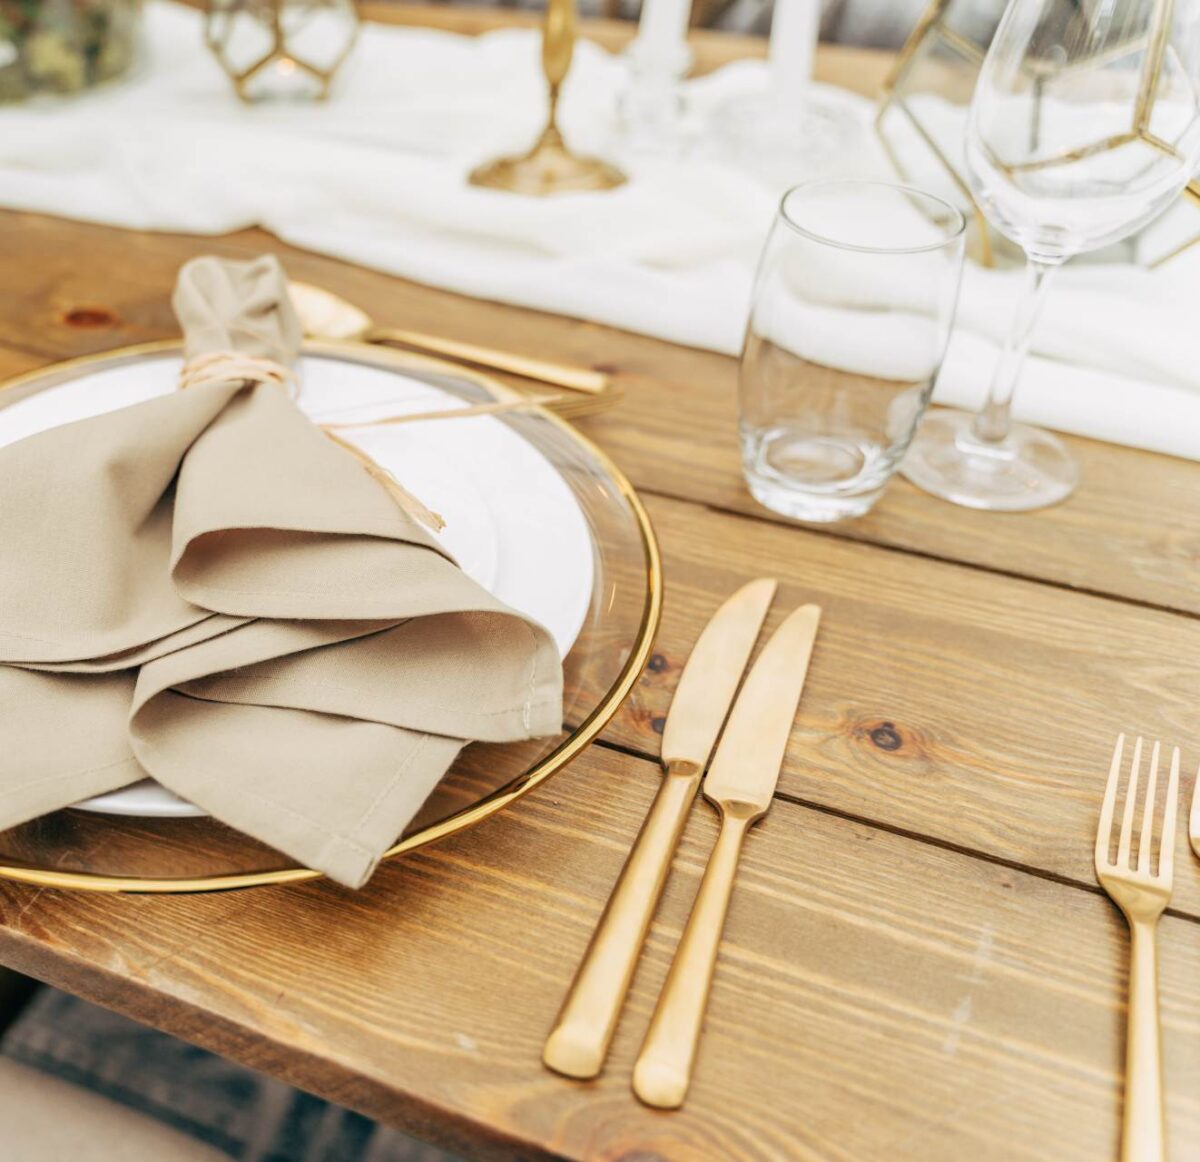 Gold Cutlery for a wedding breakfast setup from Fabulous Functions UK